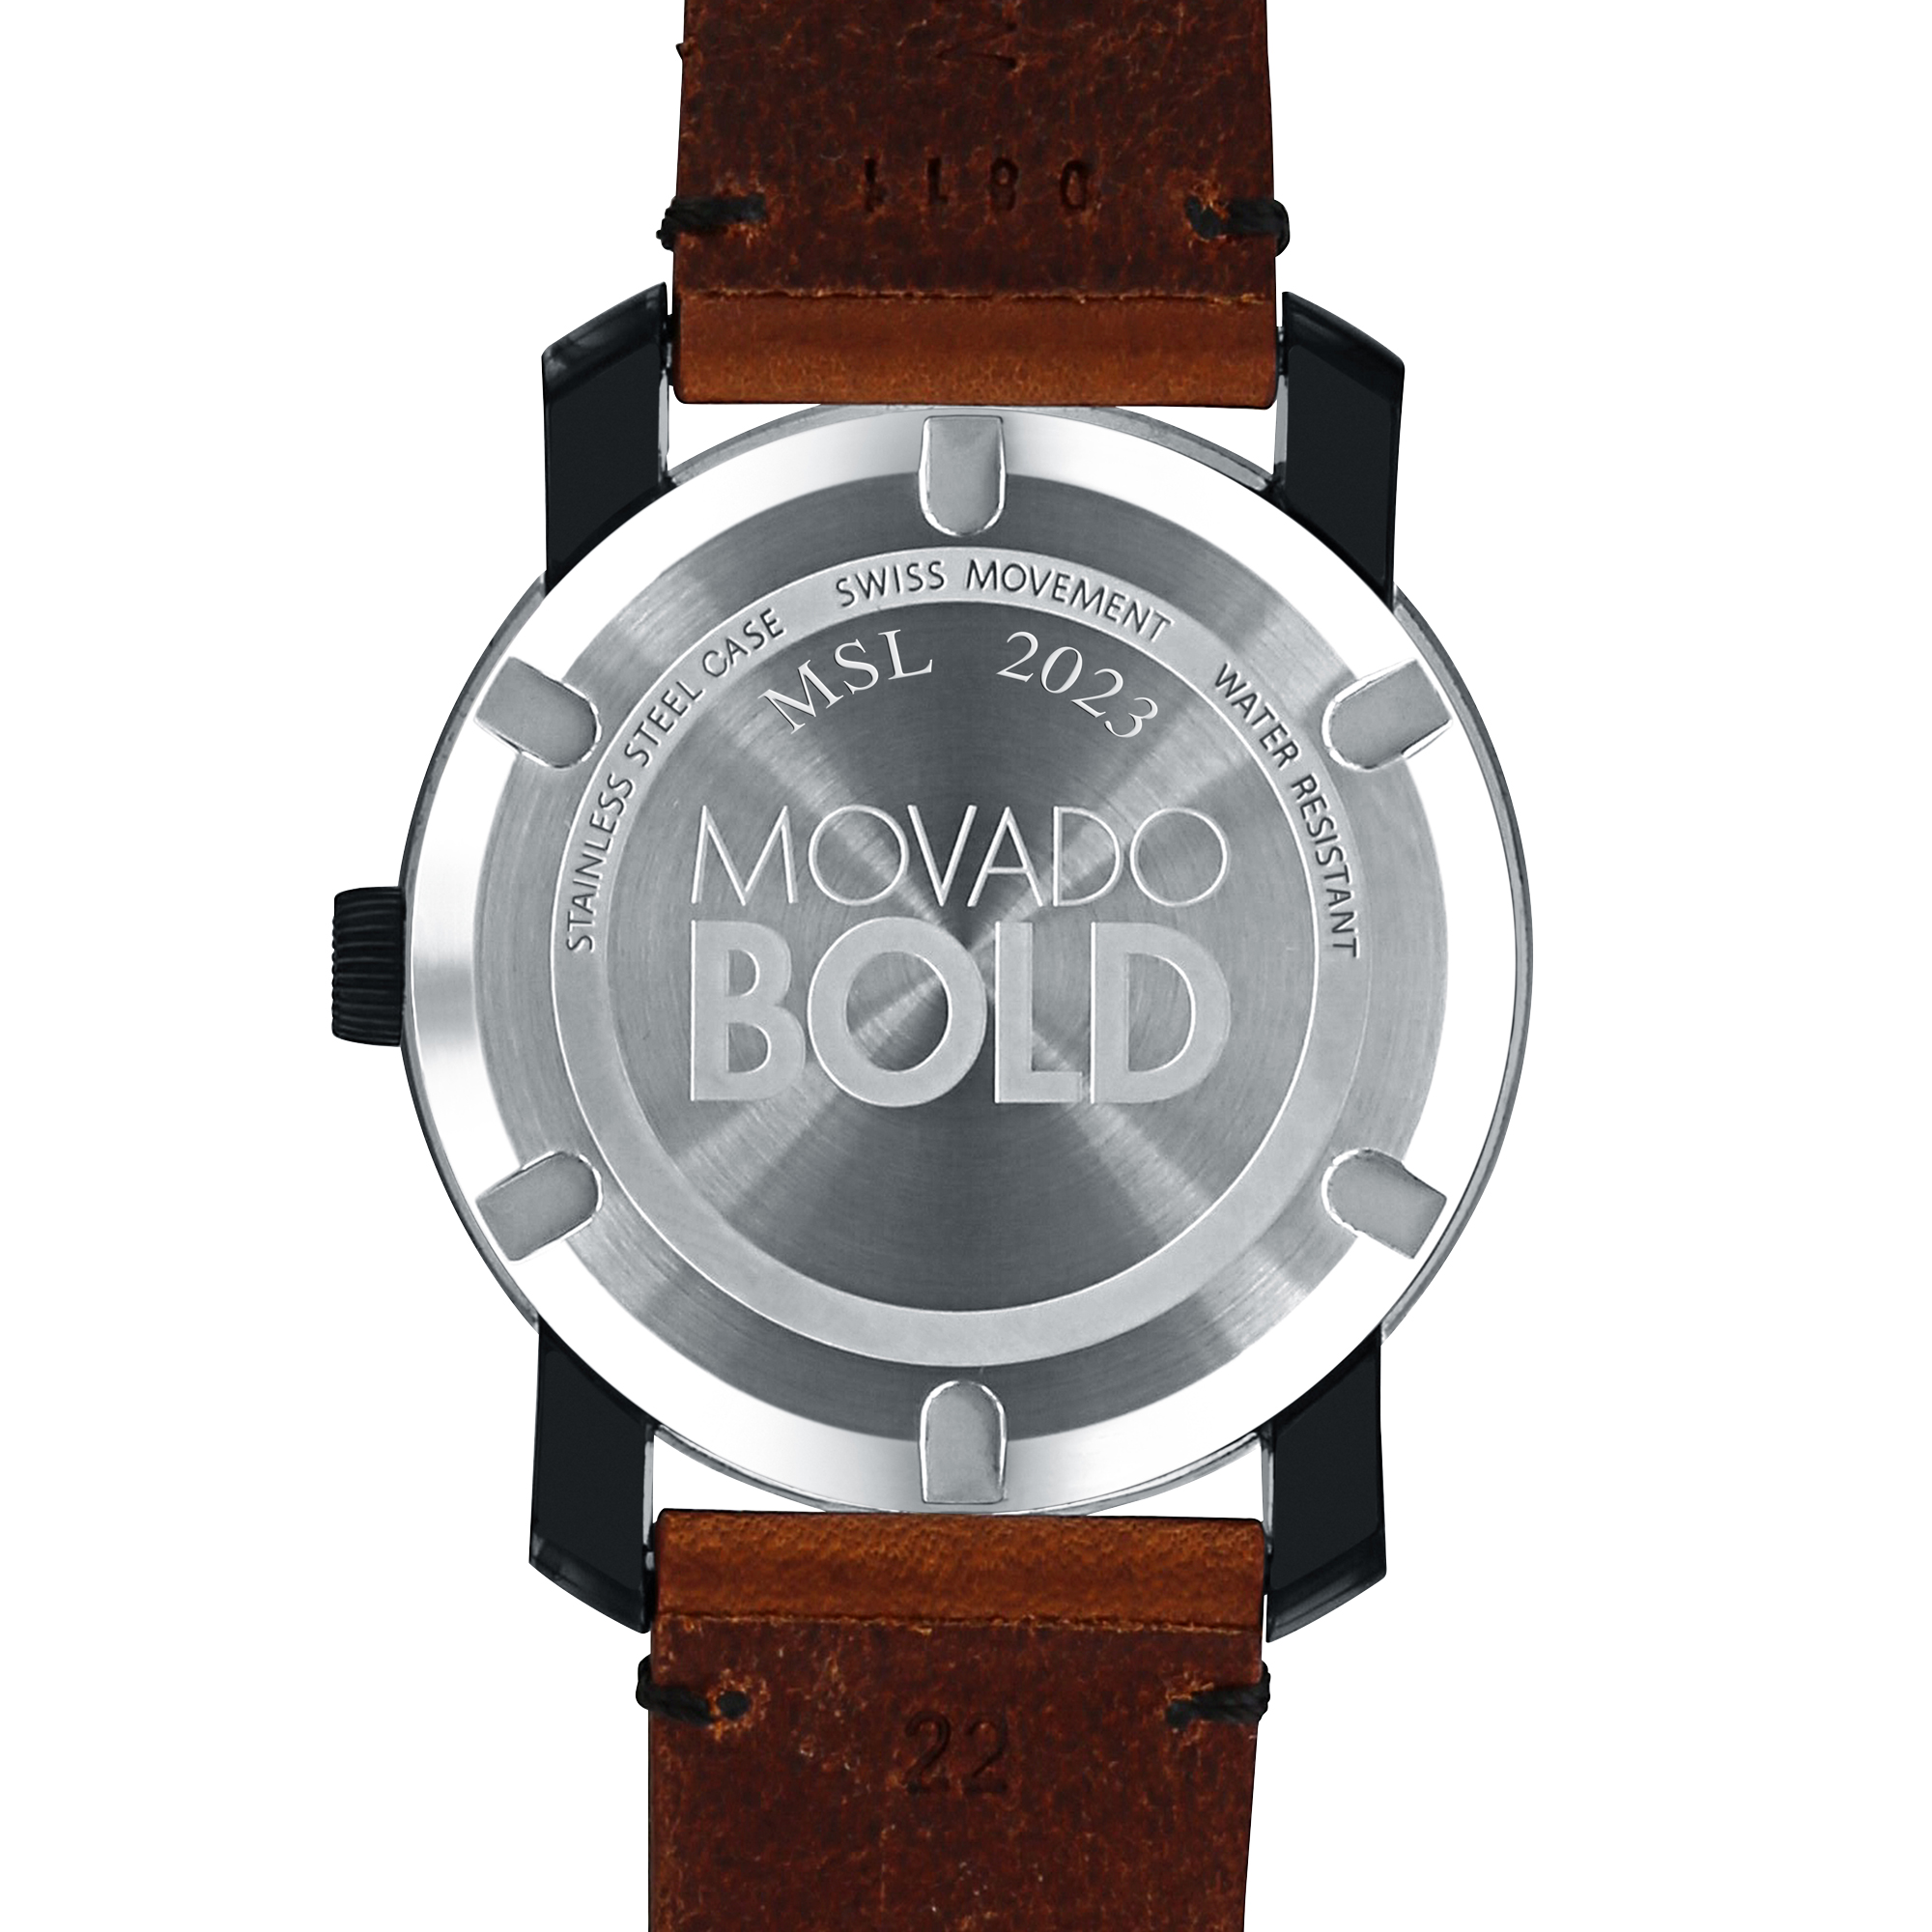 College of William & Mary Men's Movado BOLD with Brown Leather Strap - Image 3